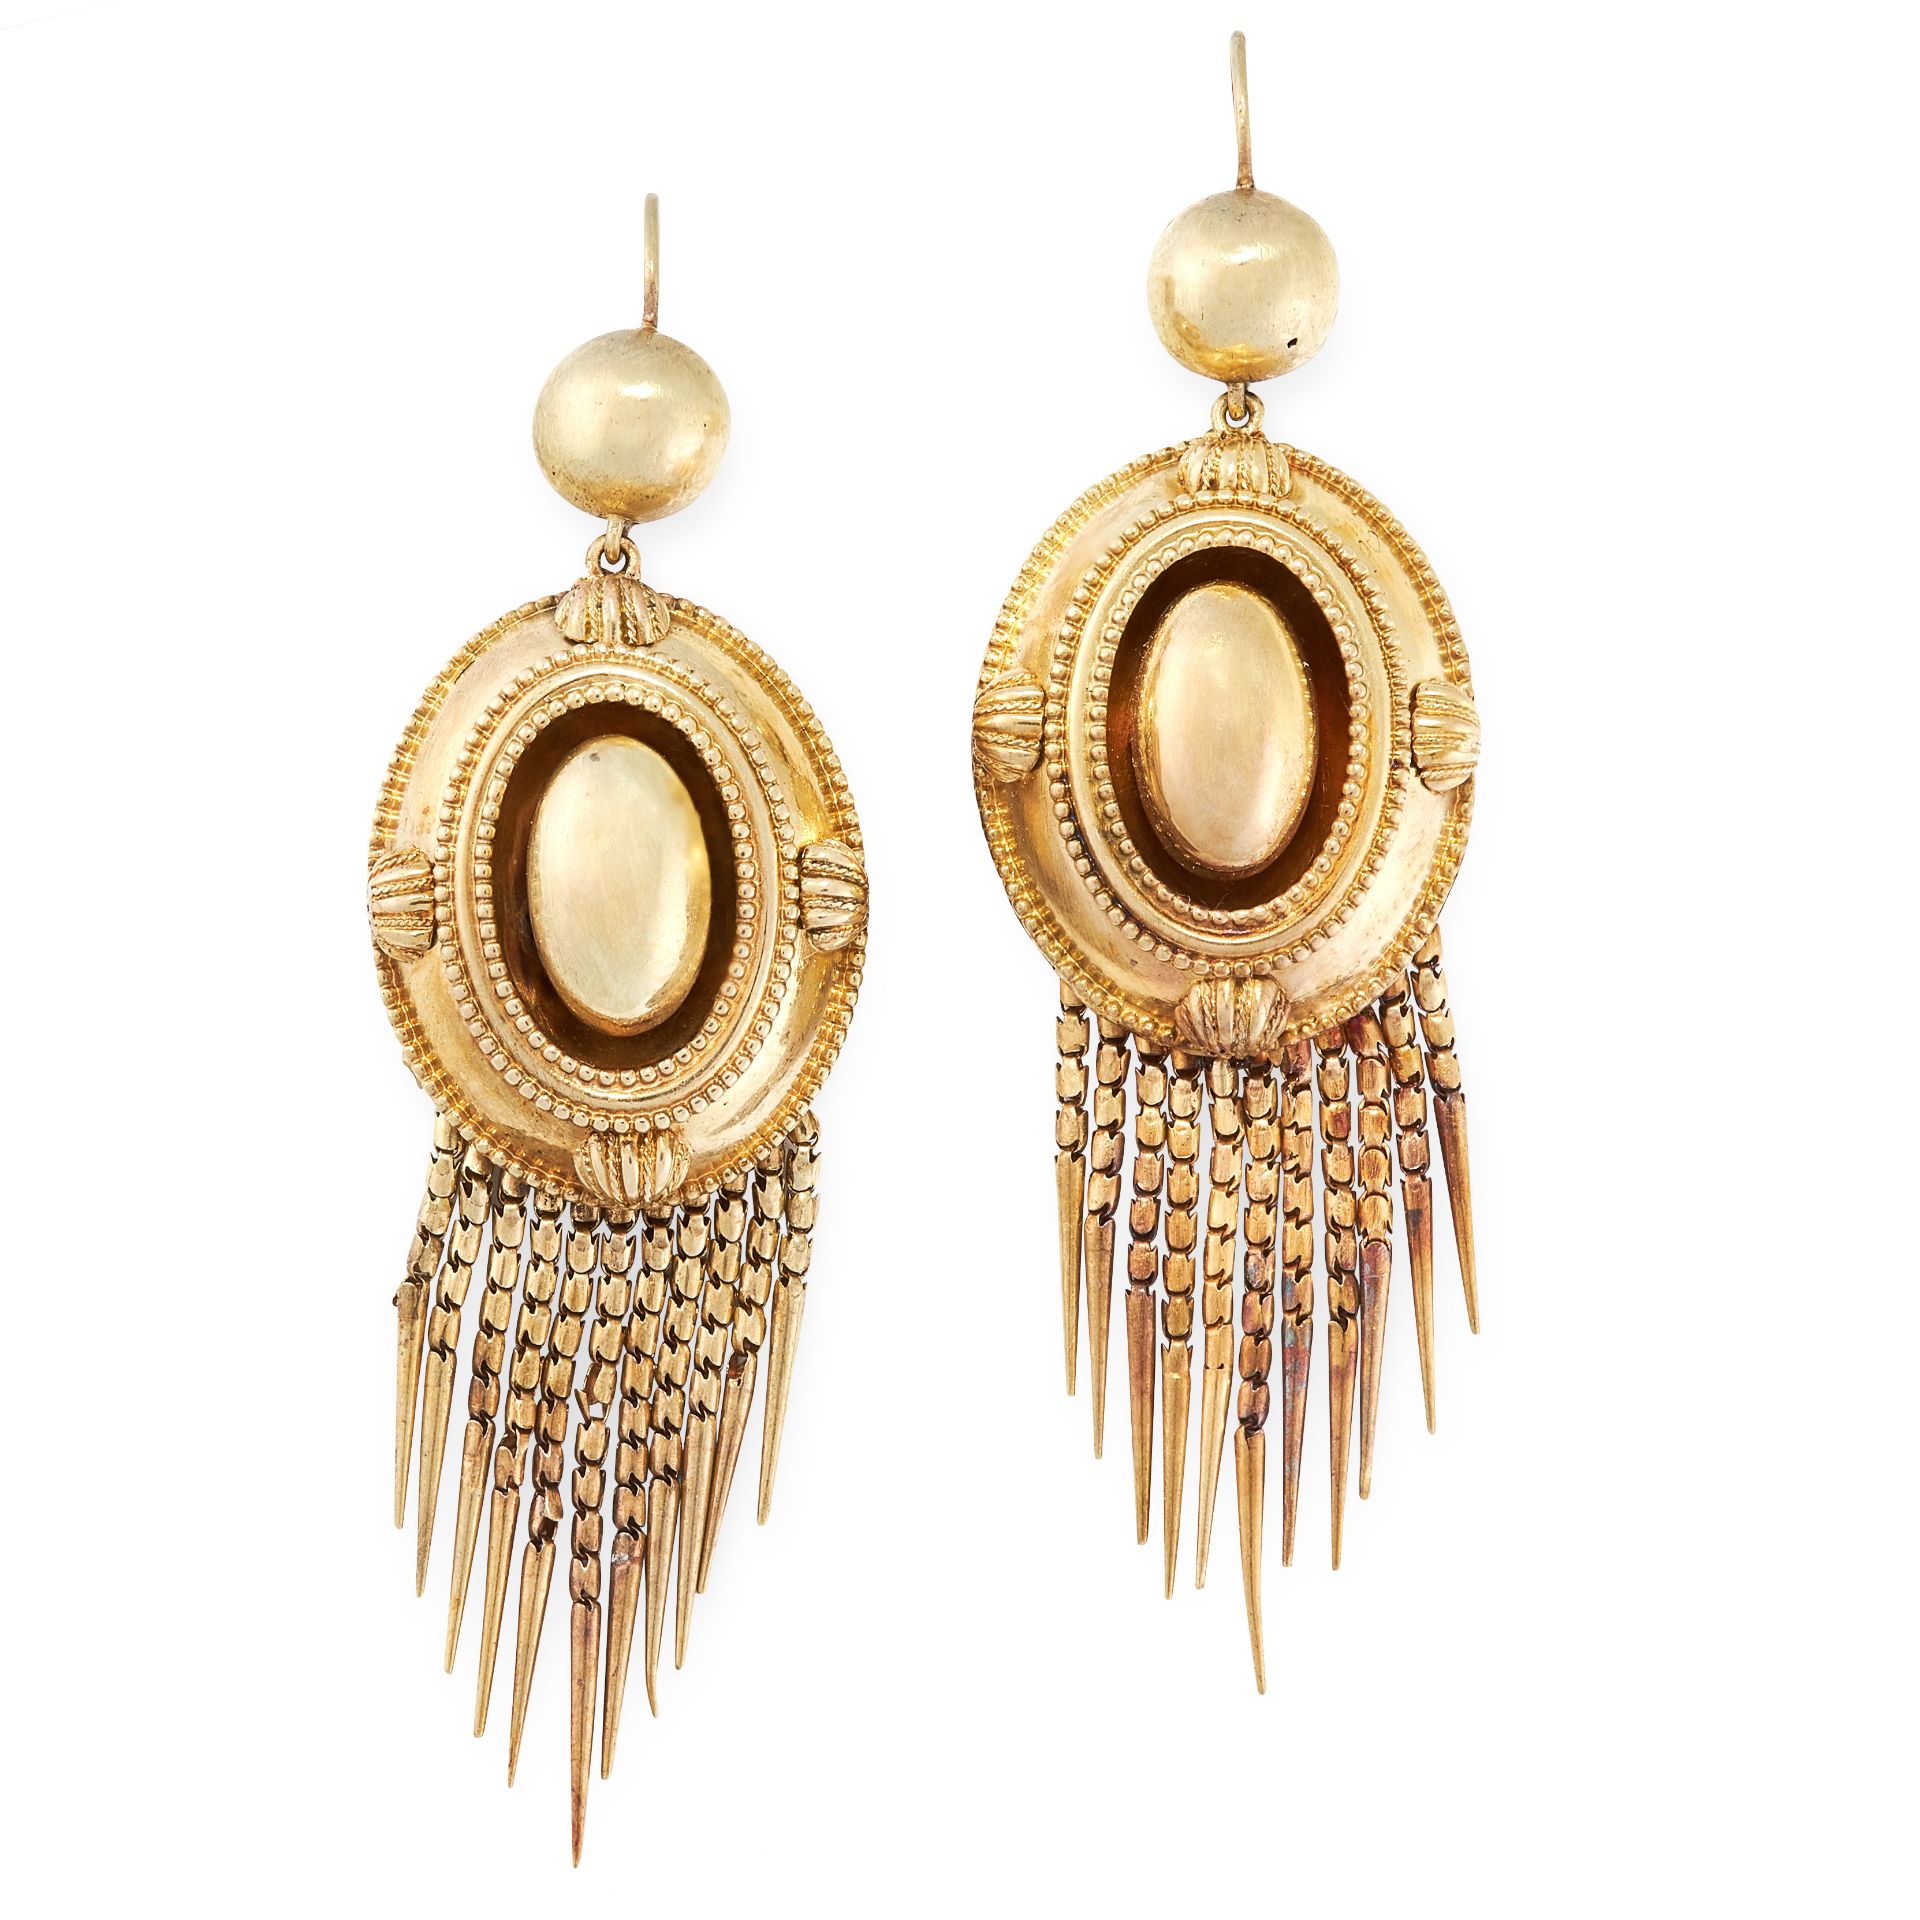 A PAIR OF ANTIQUE TASSEL EARRINGS, 19TH CENTURY in yellow gold, the oval bodies with beaded and